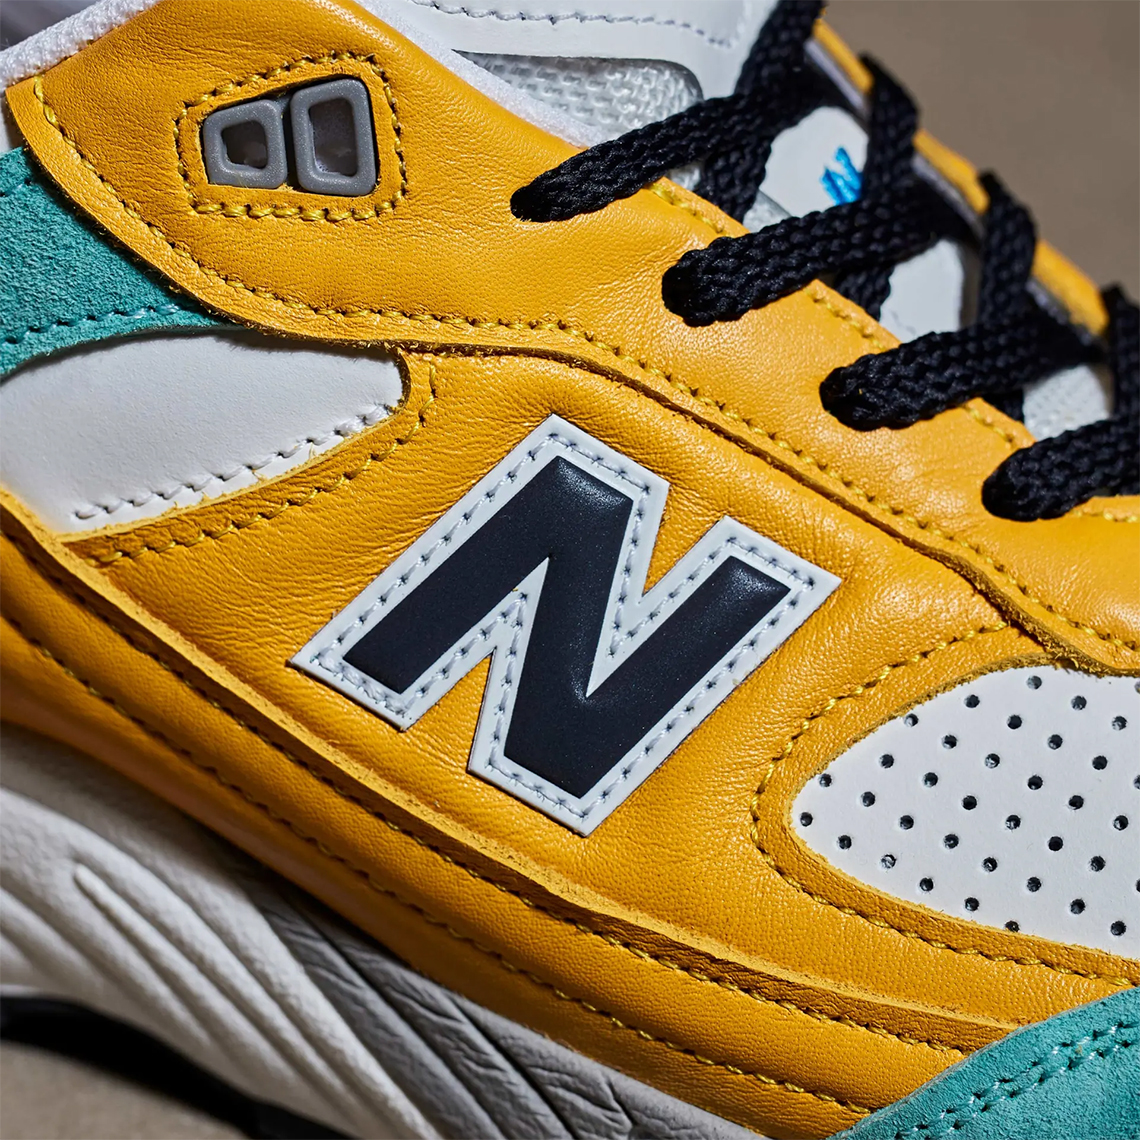 Sns New Balance 991 Mint Yellow M991sns Release Date 3